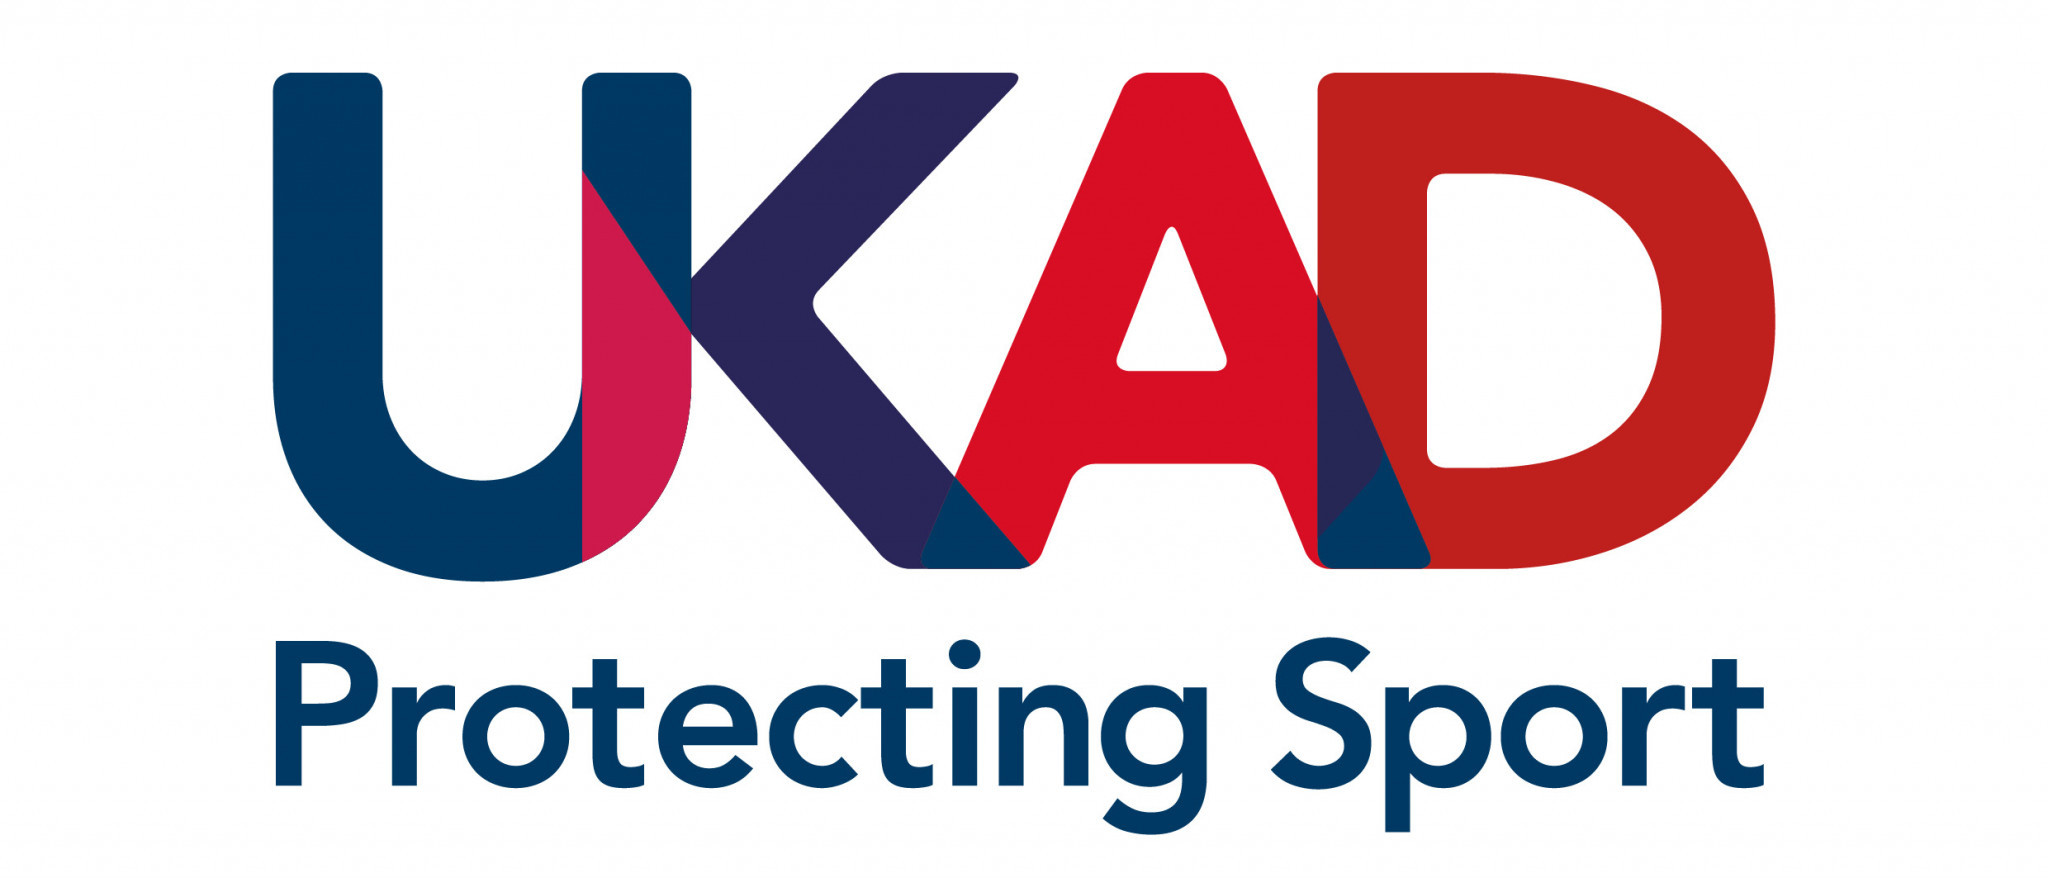 UKAD described as "extremely competent" in WADA audit